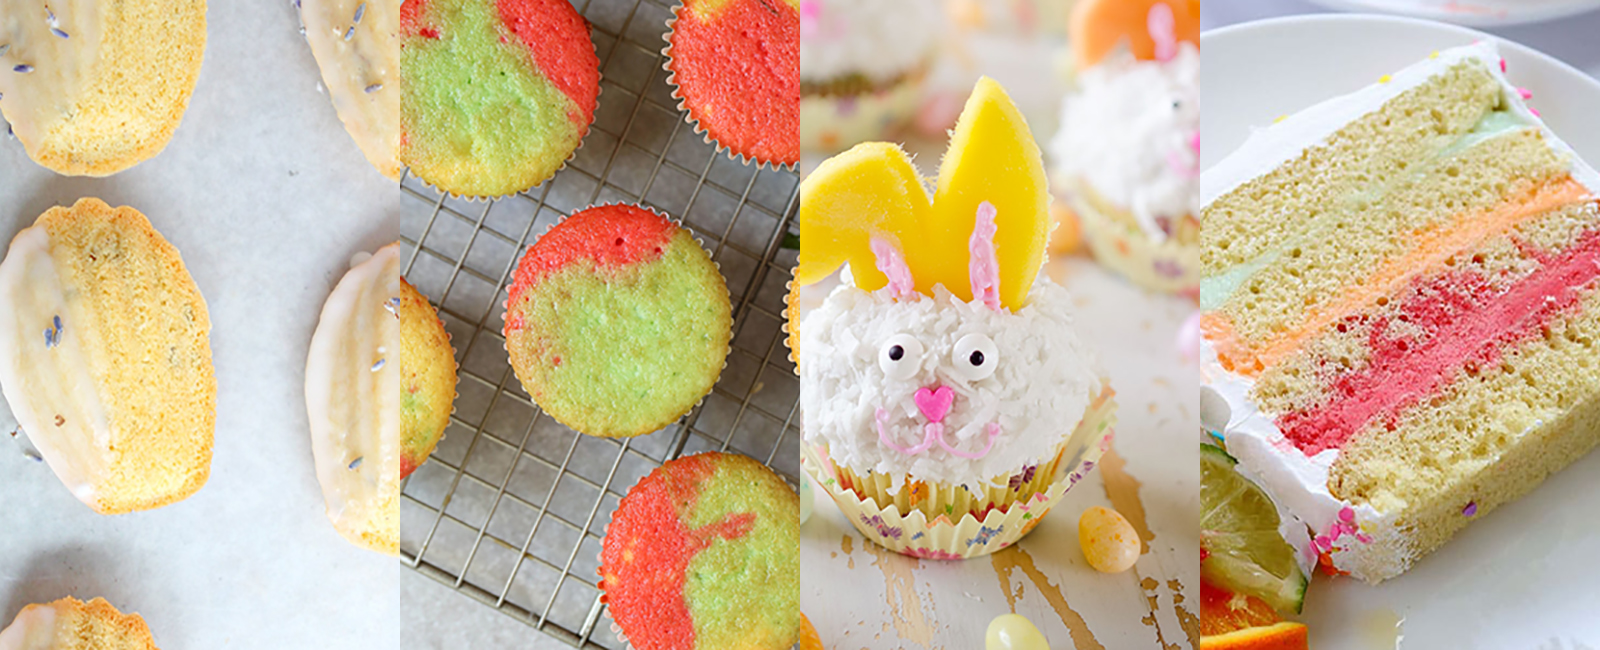 8 of the Cutest Easter Desserts to Add on This Year’s Sweets Table